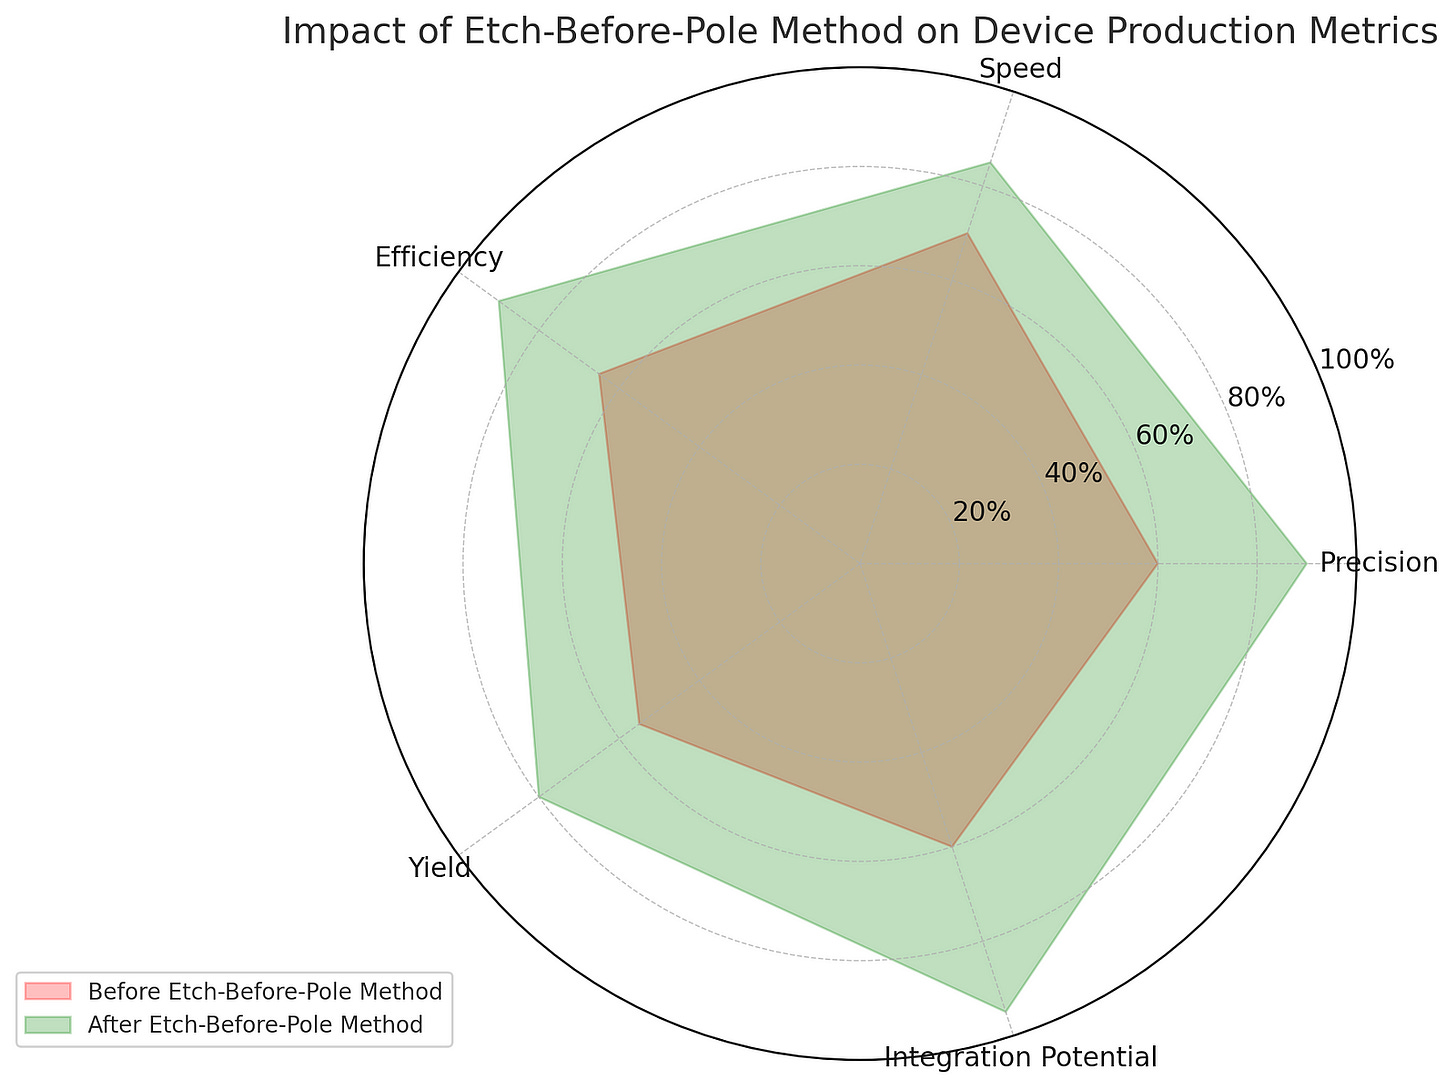 Radar chart comparing performance metrics of thin-film lithium niobate devices before and after the adoption of the etch-before-pole method. The metrics include precision, speed, efficiency, yield, and integration potential. Each metric shows significant improvement in the new method, depicted by the expansion from the red area (before) to the green area (after).